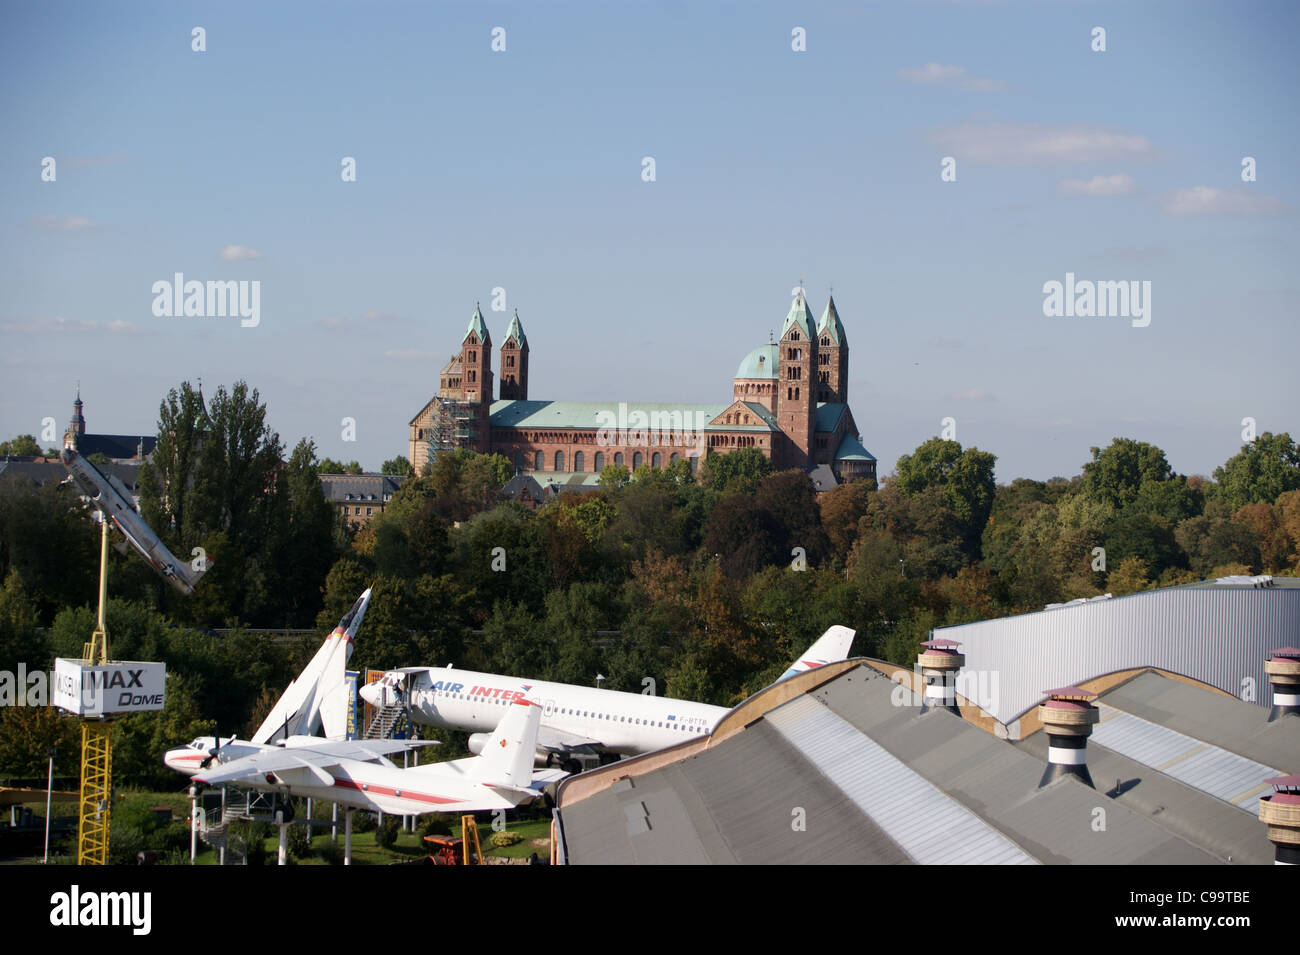 Romanesque cathedral of Speyer, Rheinland-Pfalz, Germany seen from the Technik Museum (air museum) Stock Photo